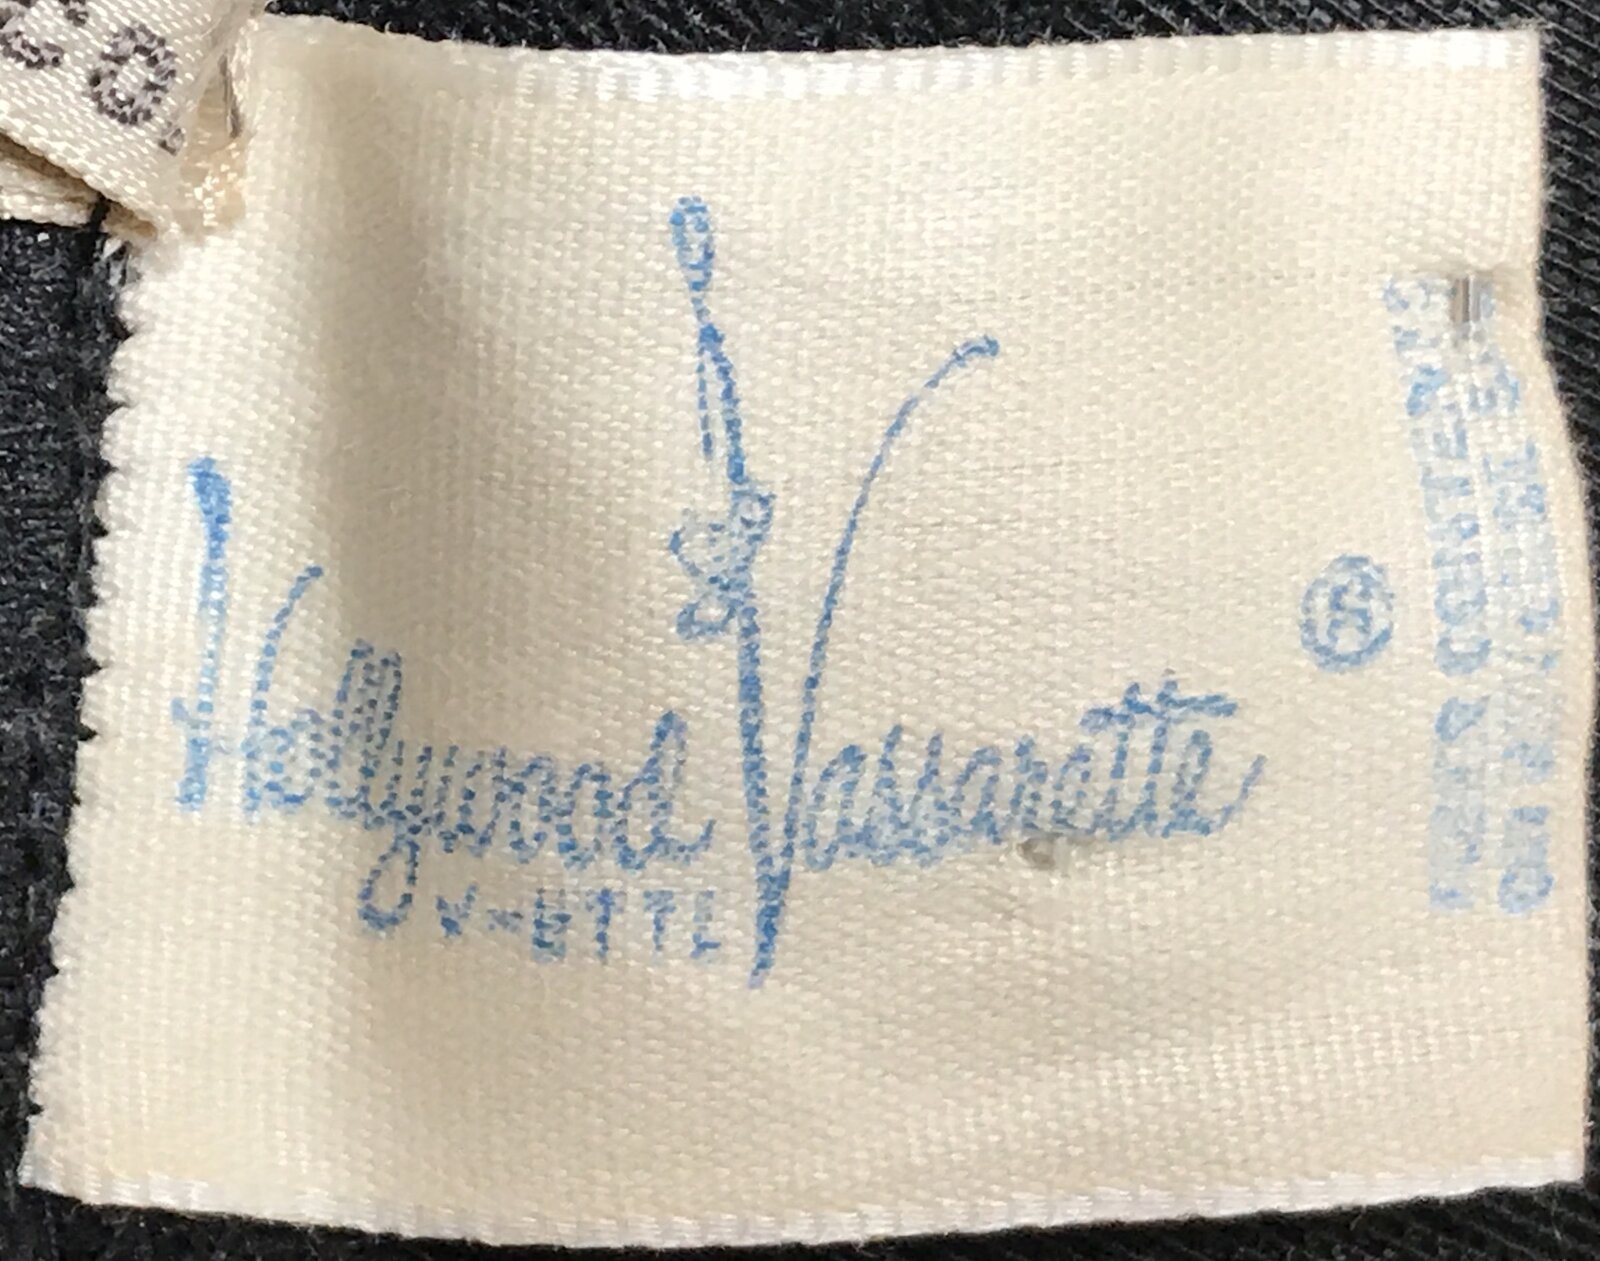 from a 1960s bullet bra - Courtesy of ranchqueenvintage